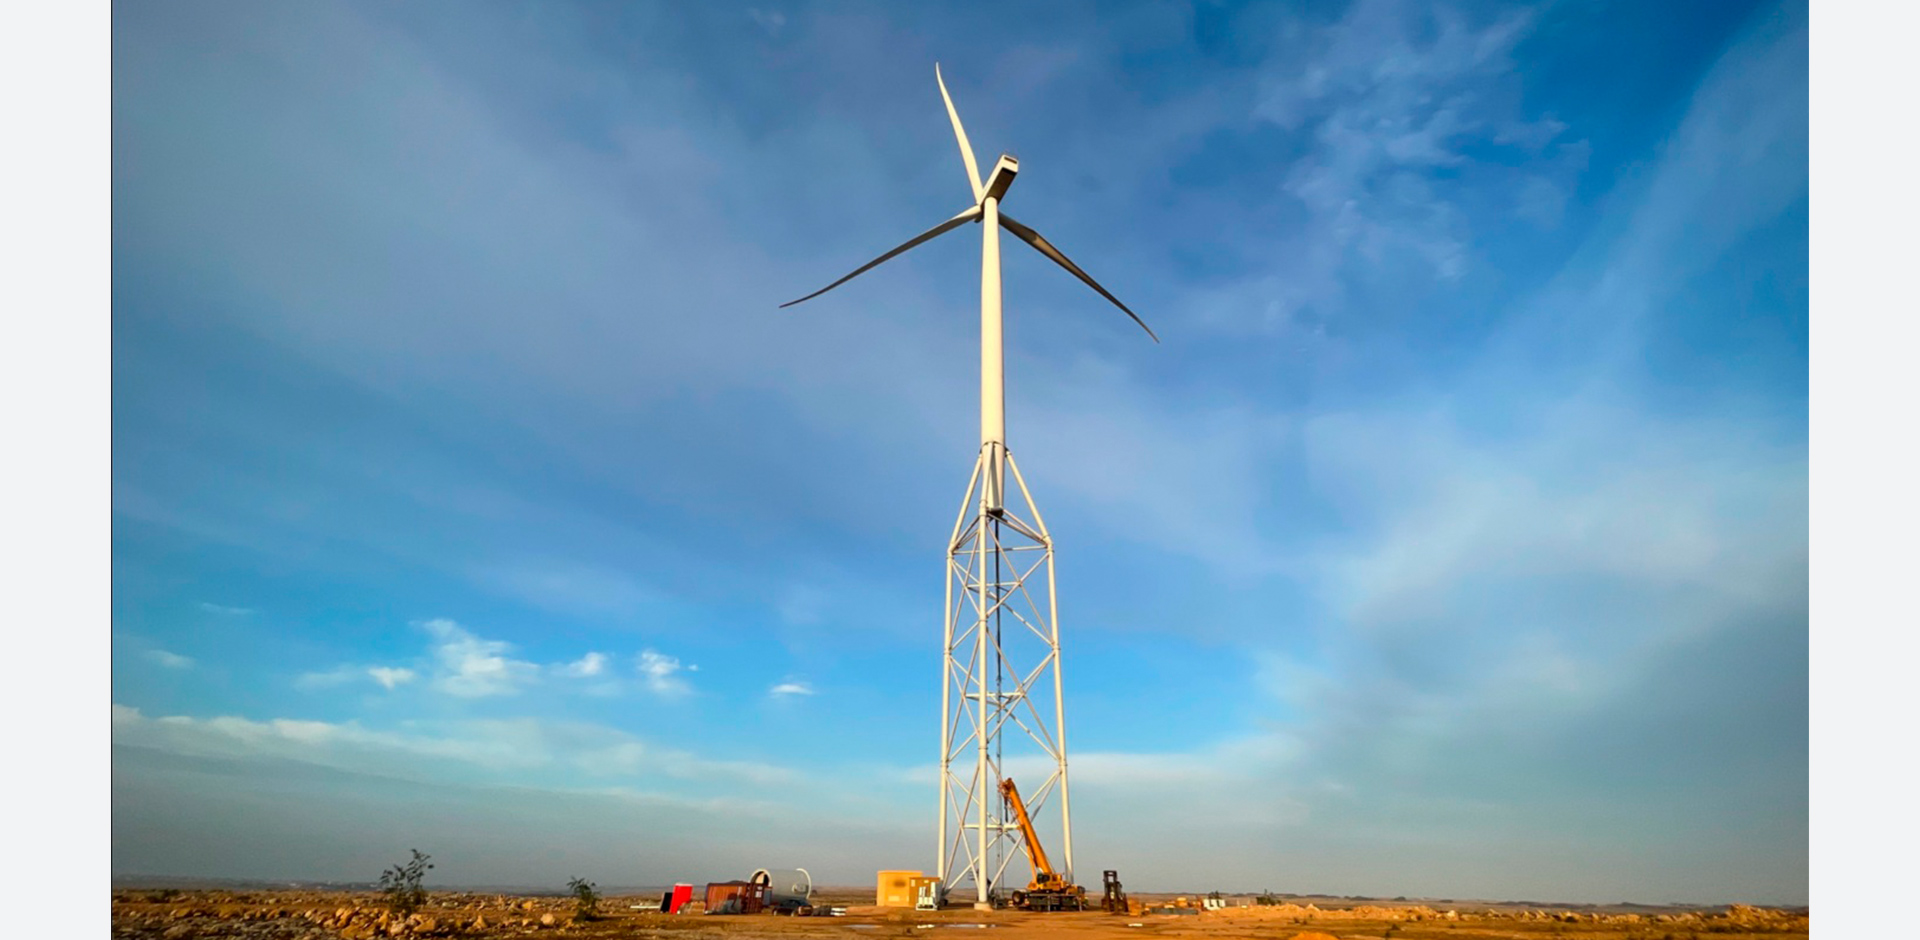 INGECID designs the foundations for the tallest wind turbine in Africa